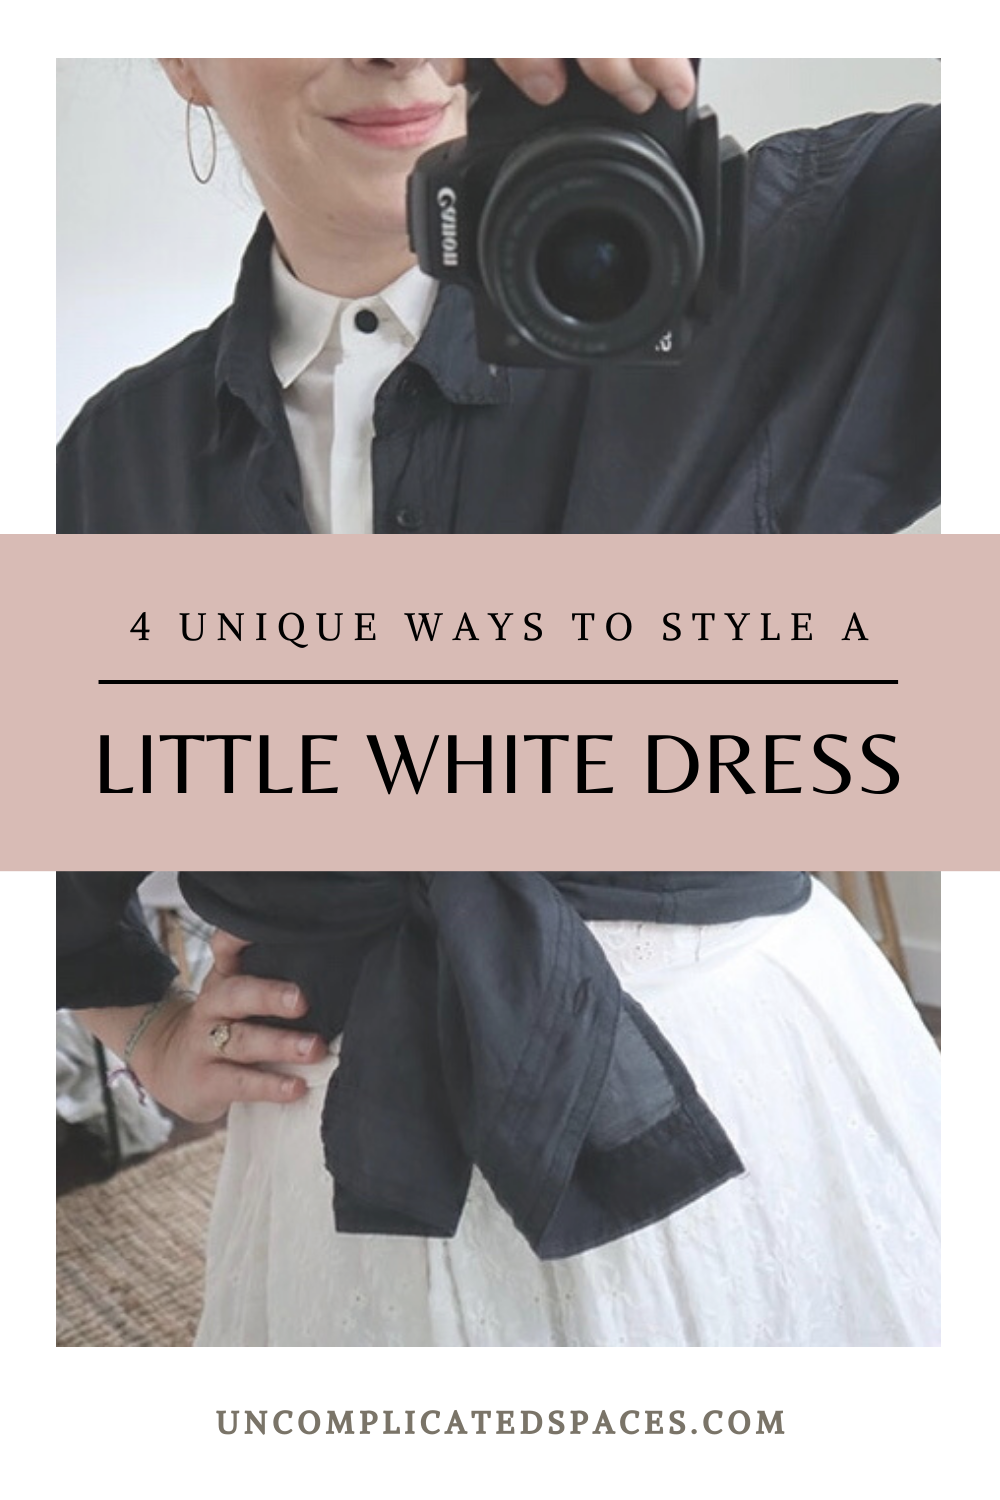 4 Unique Ways to Style A Little White Dress - Uncomplicated Spaces